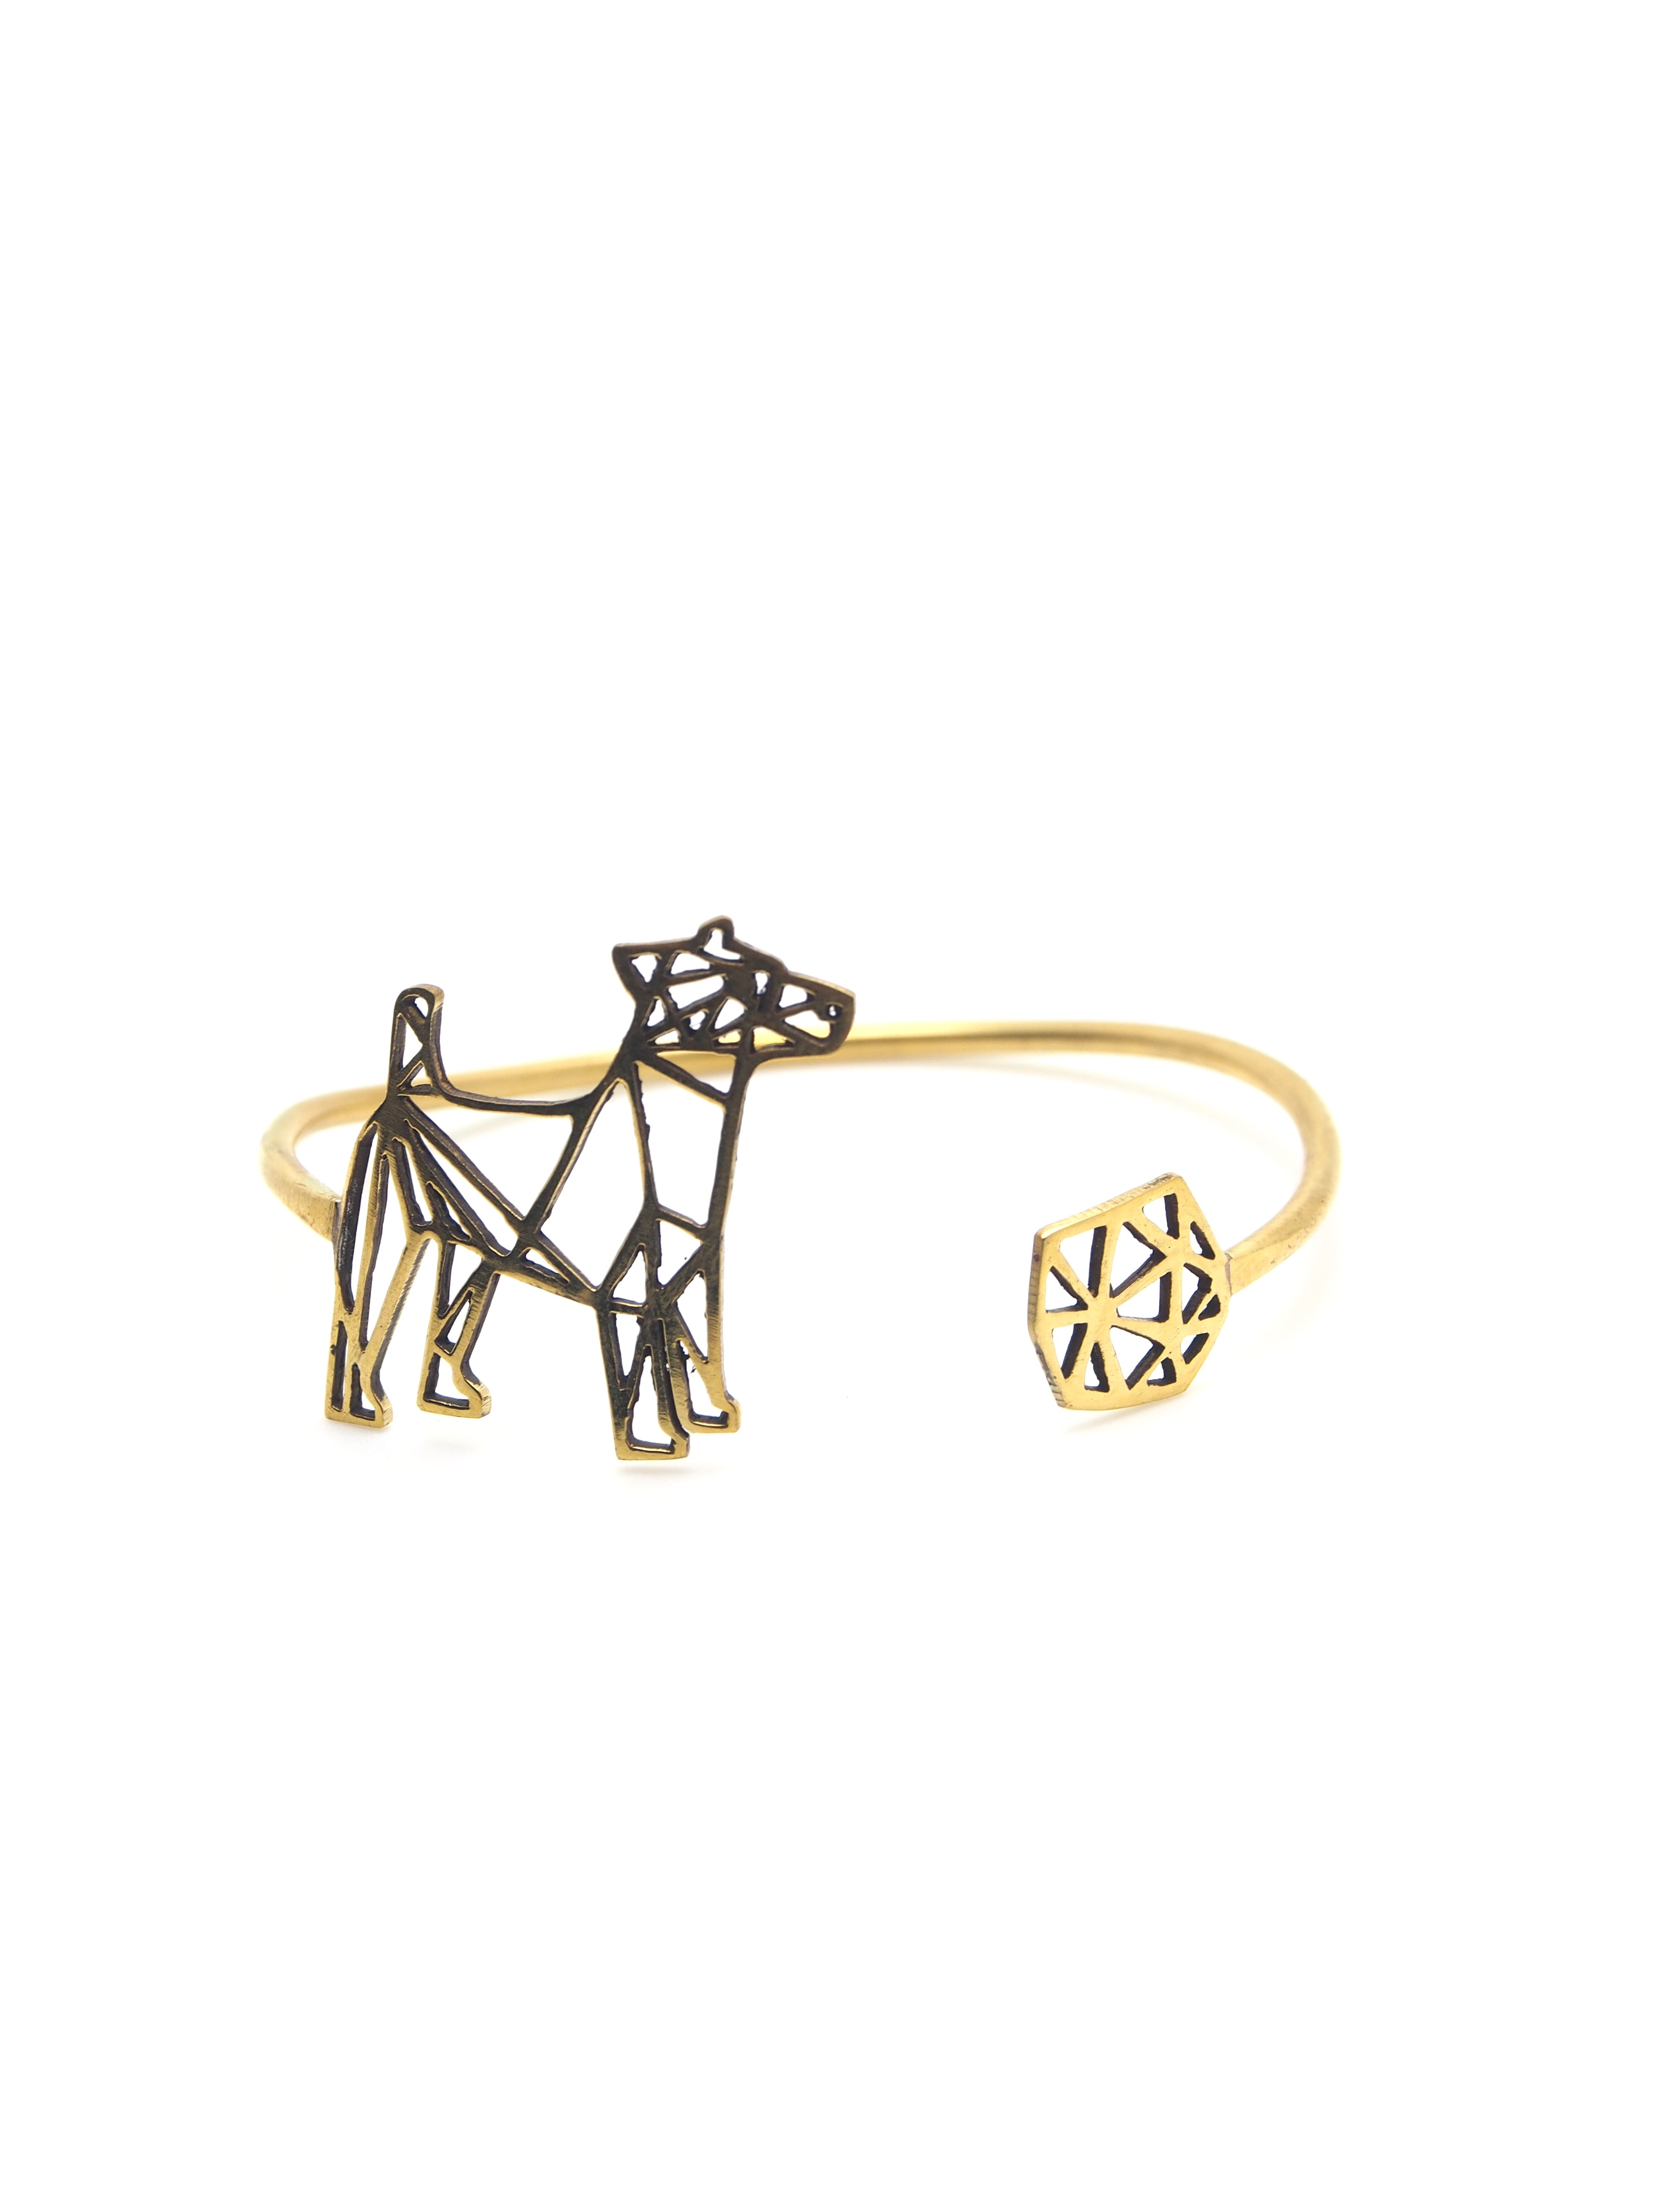 Hansel & Smith - Jack Russell Terrier Bangle